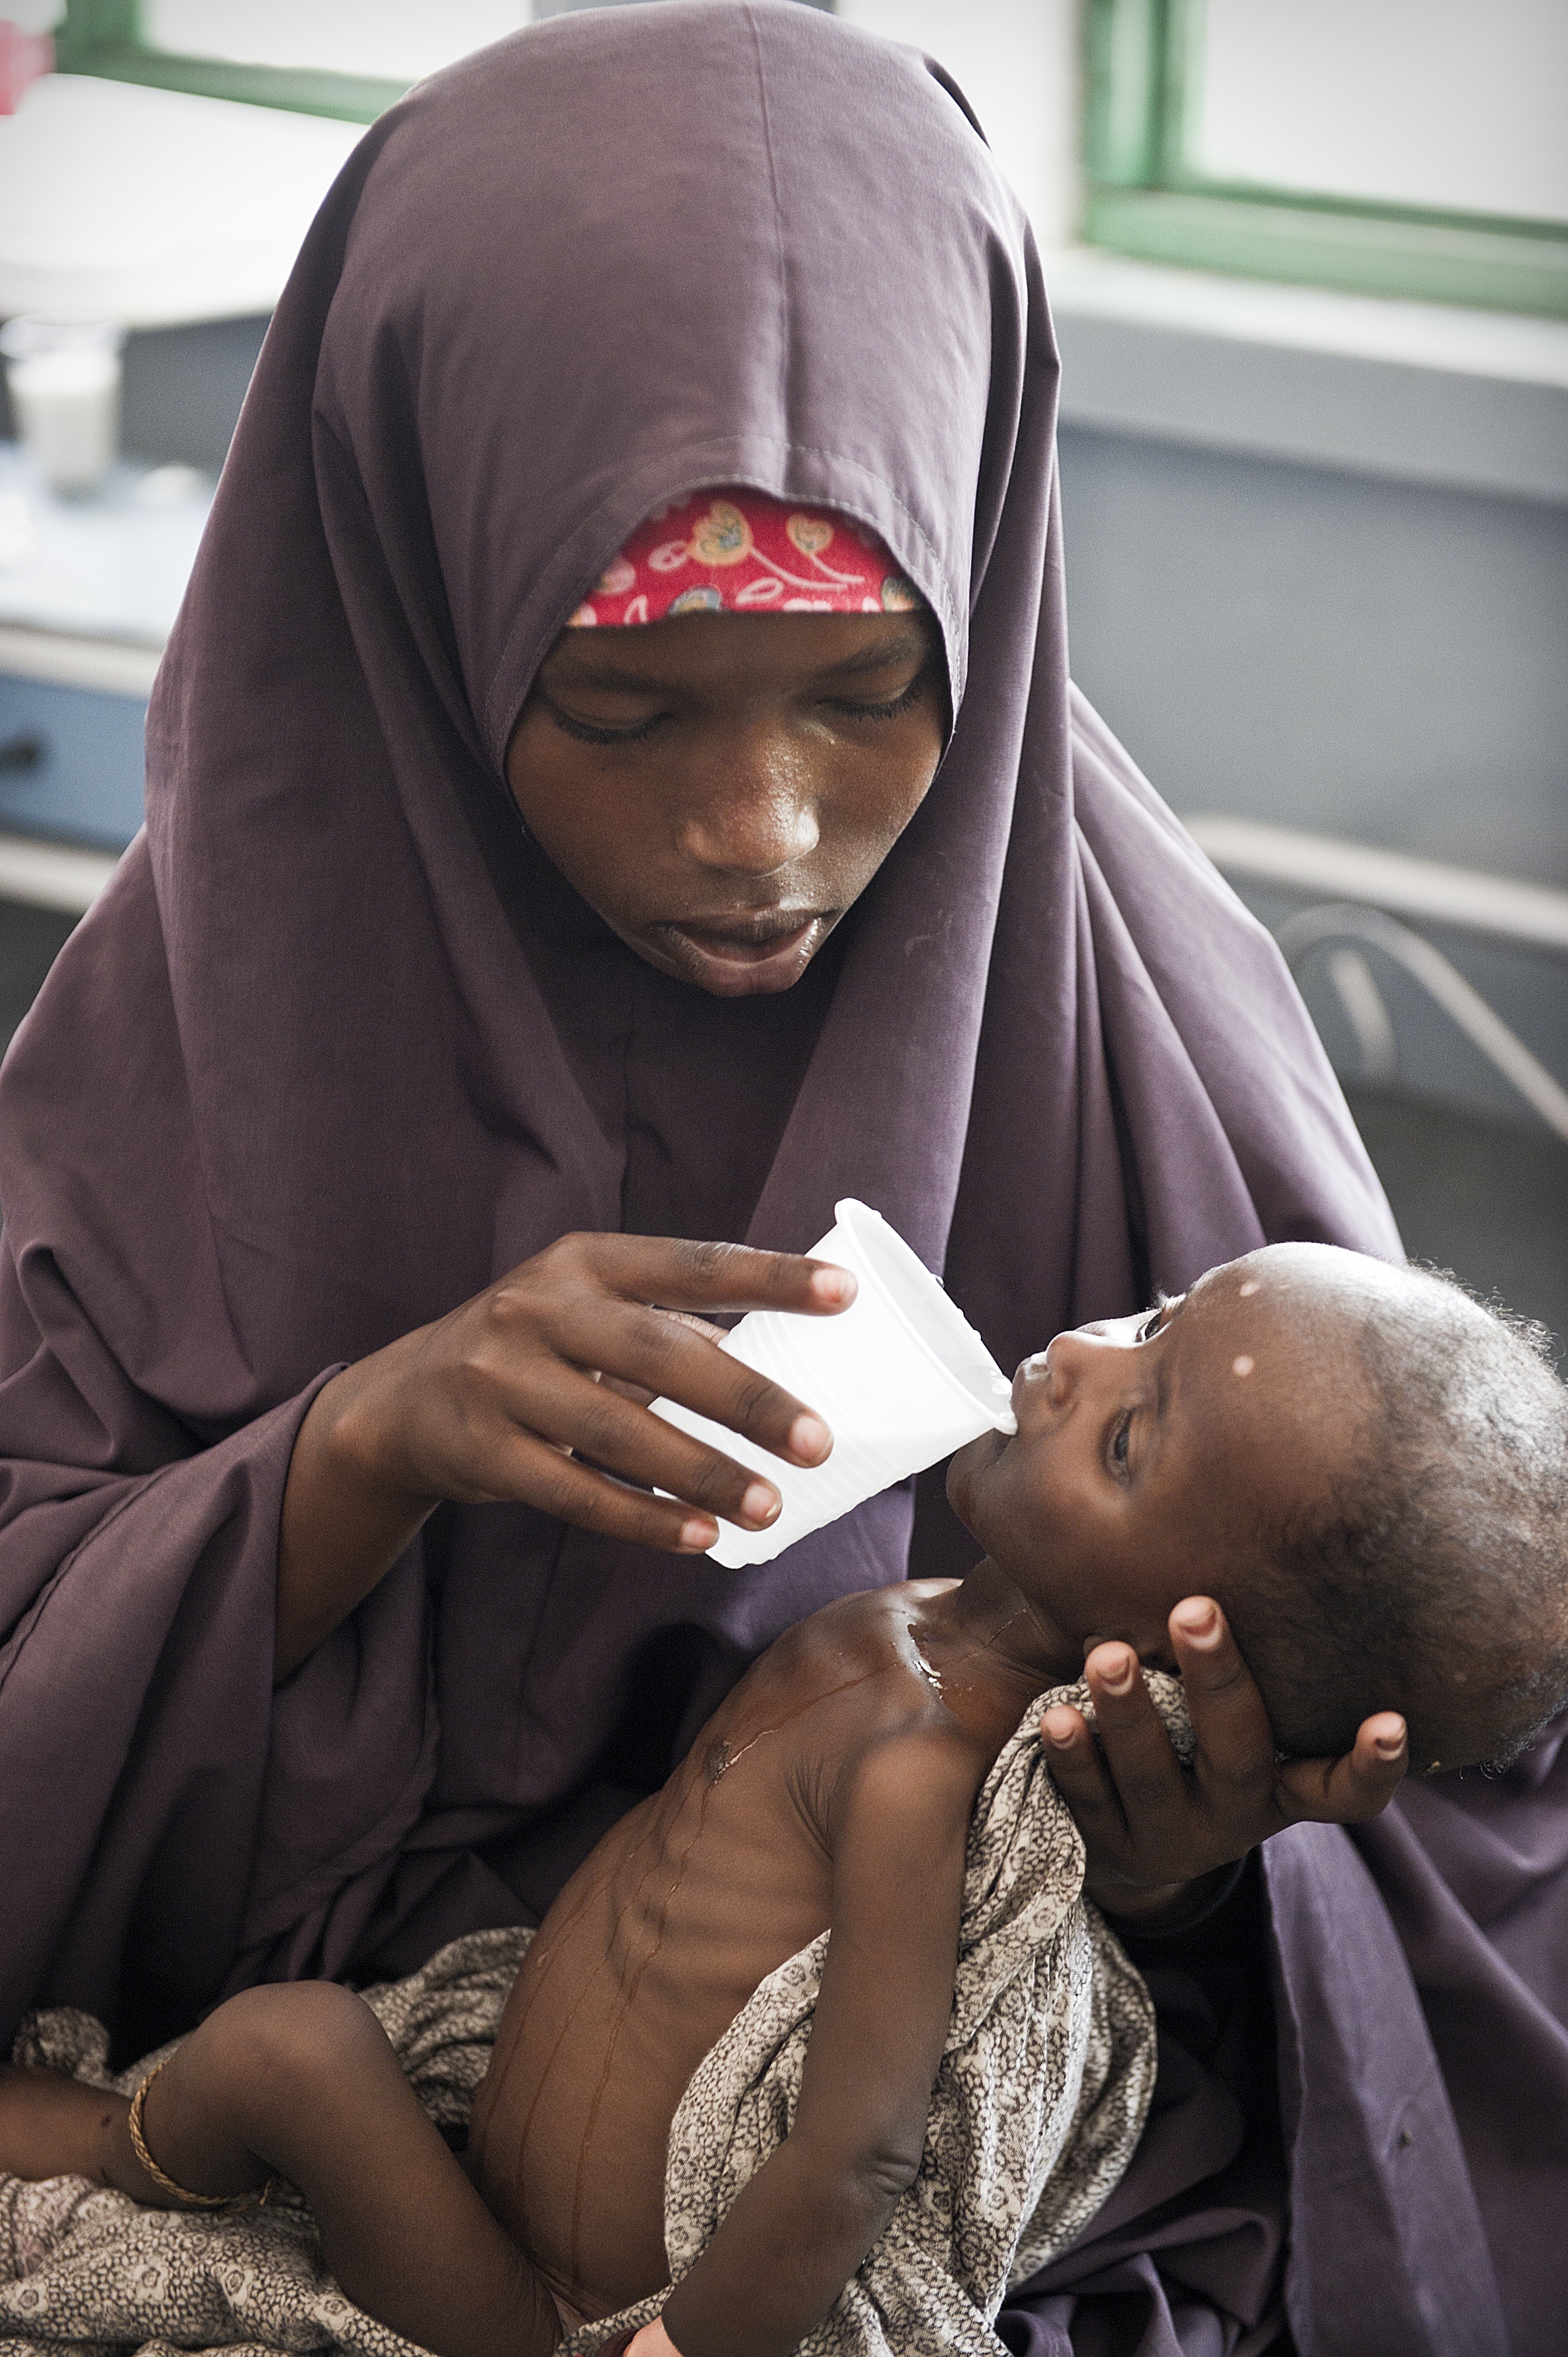 DESPERATE NEED – Pictured here is a young mother feeding her malnourished child. In Somalia a devastating famine has taken lives of tens of thousands of children since July.